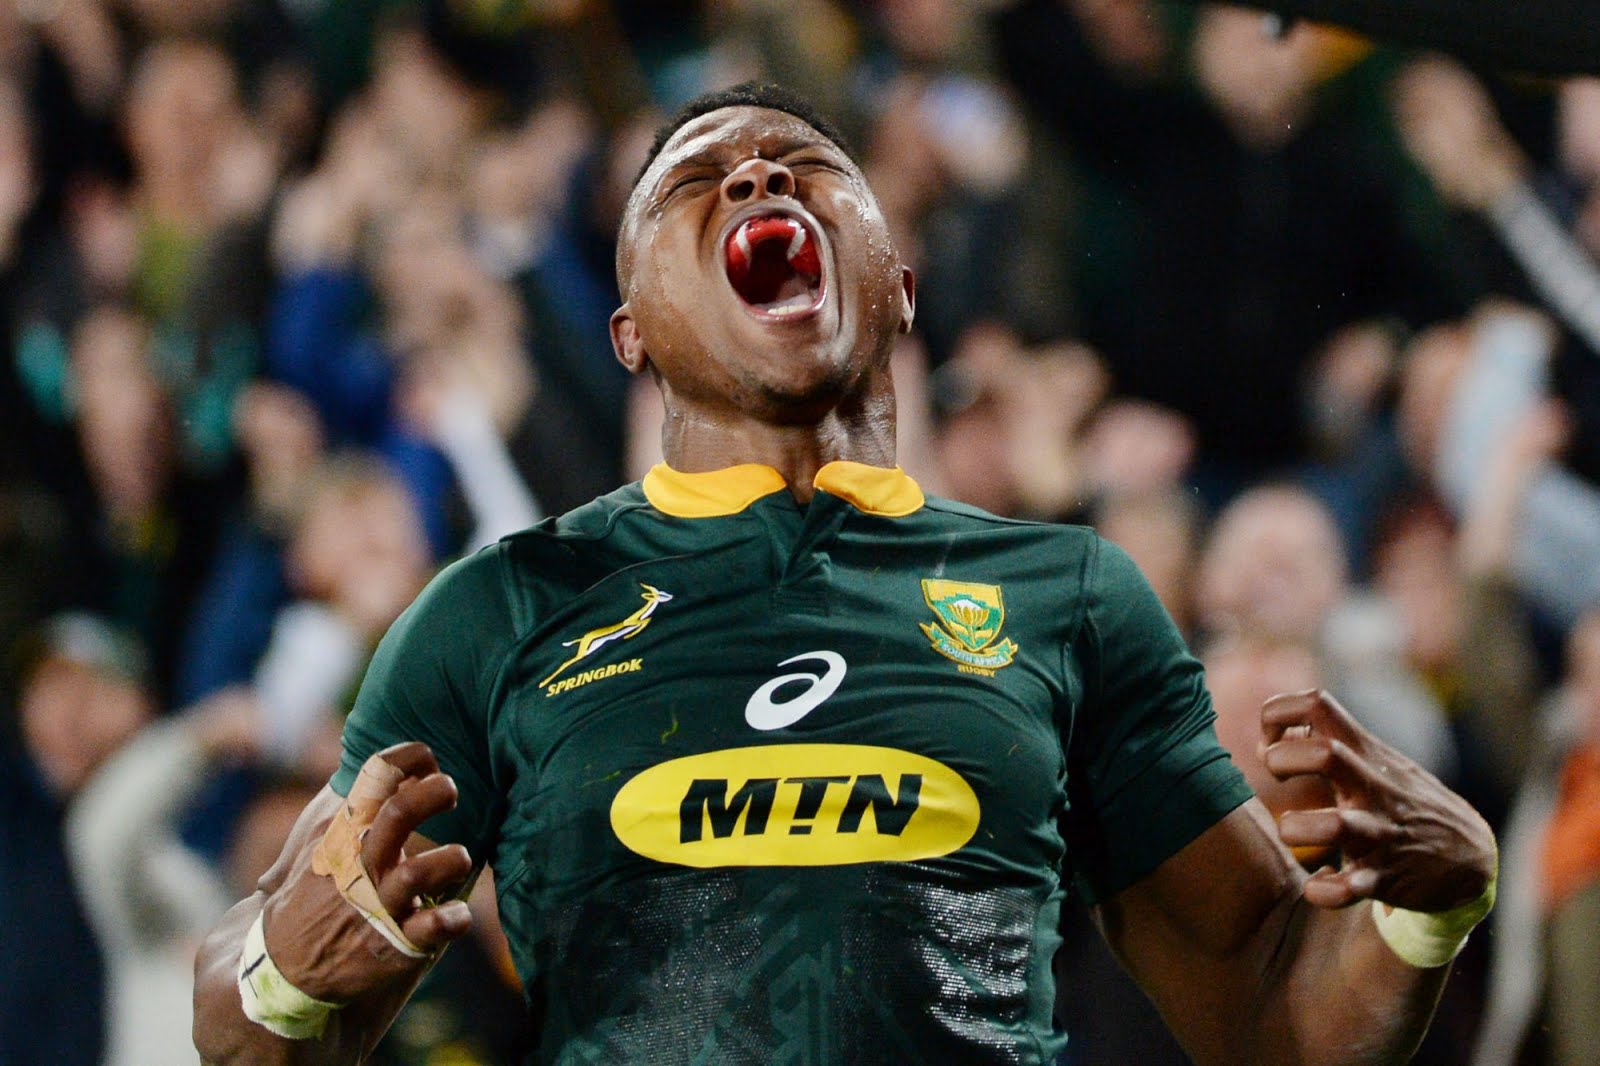 Aphiwe Dyantyi celebrates a try for the Springboks